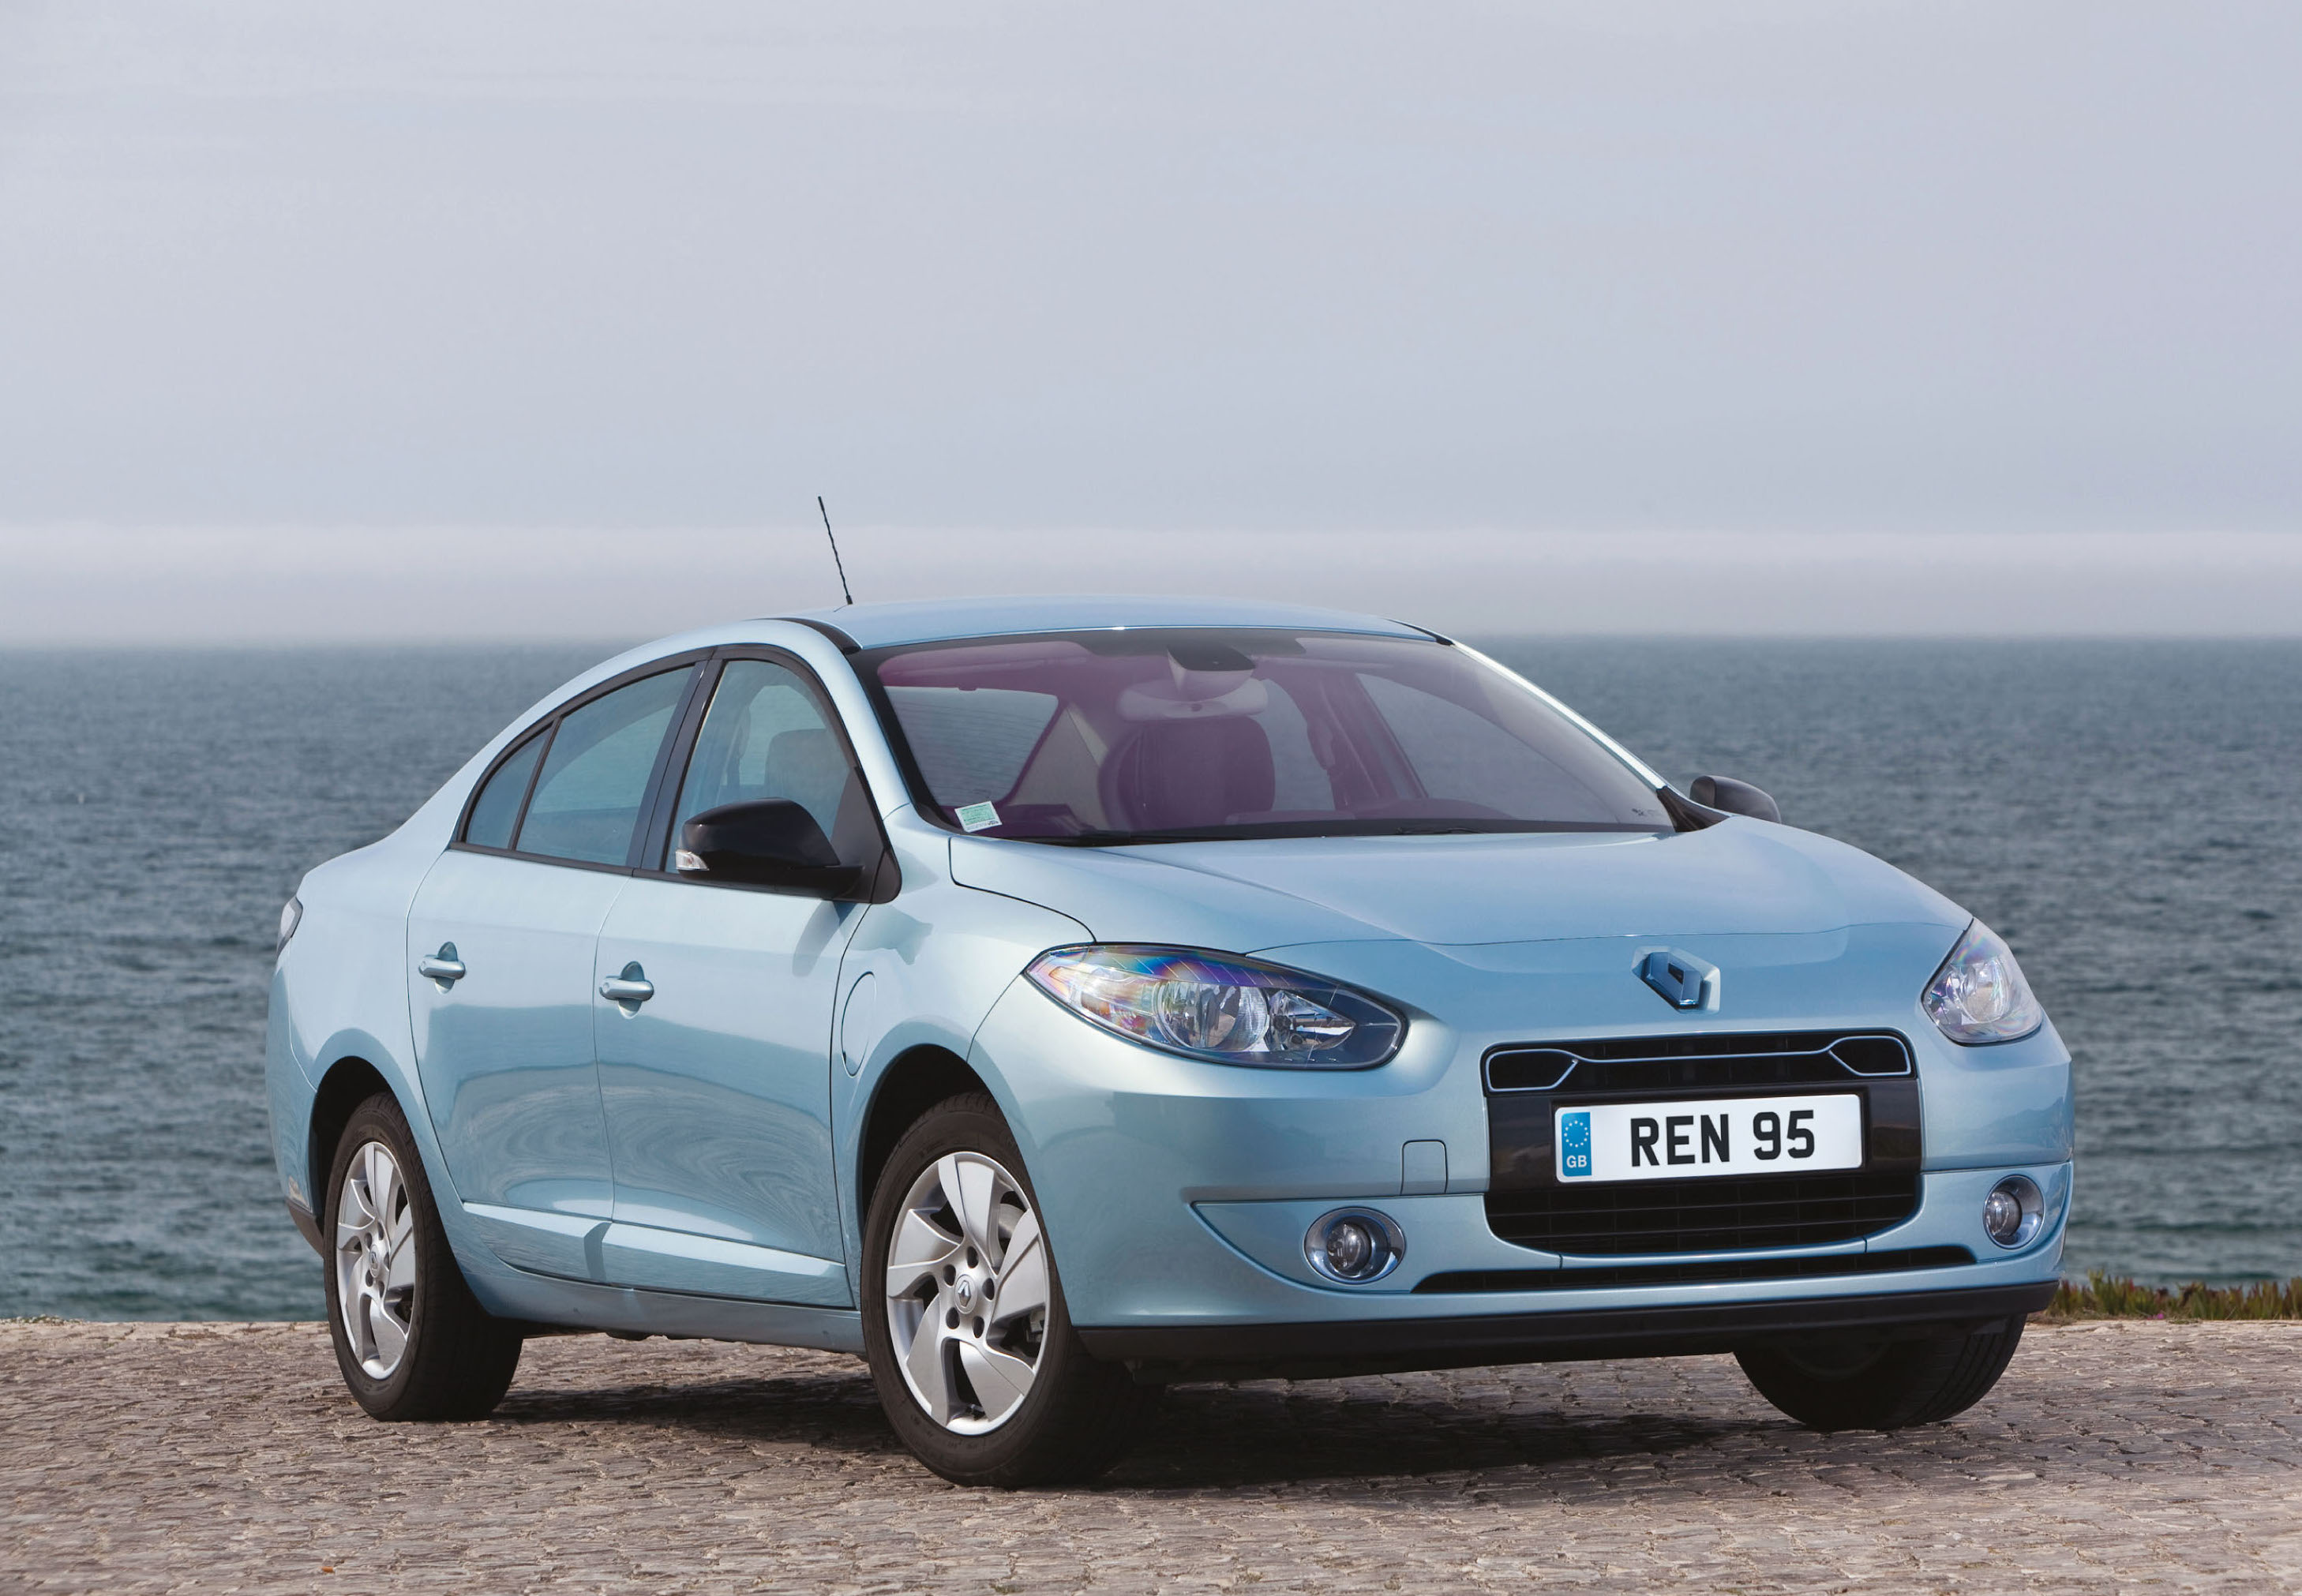 The Fluence afforded drivers a little more cabin space with their electric car